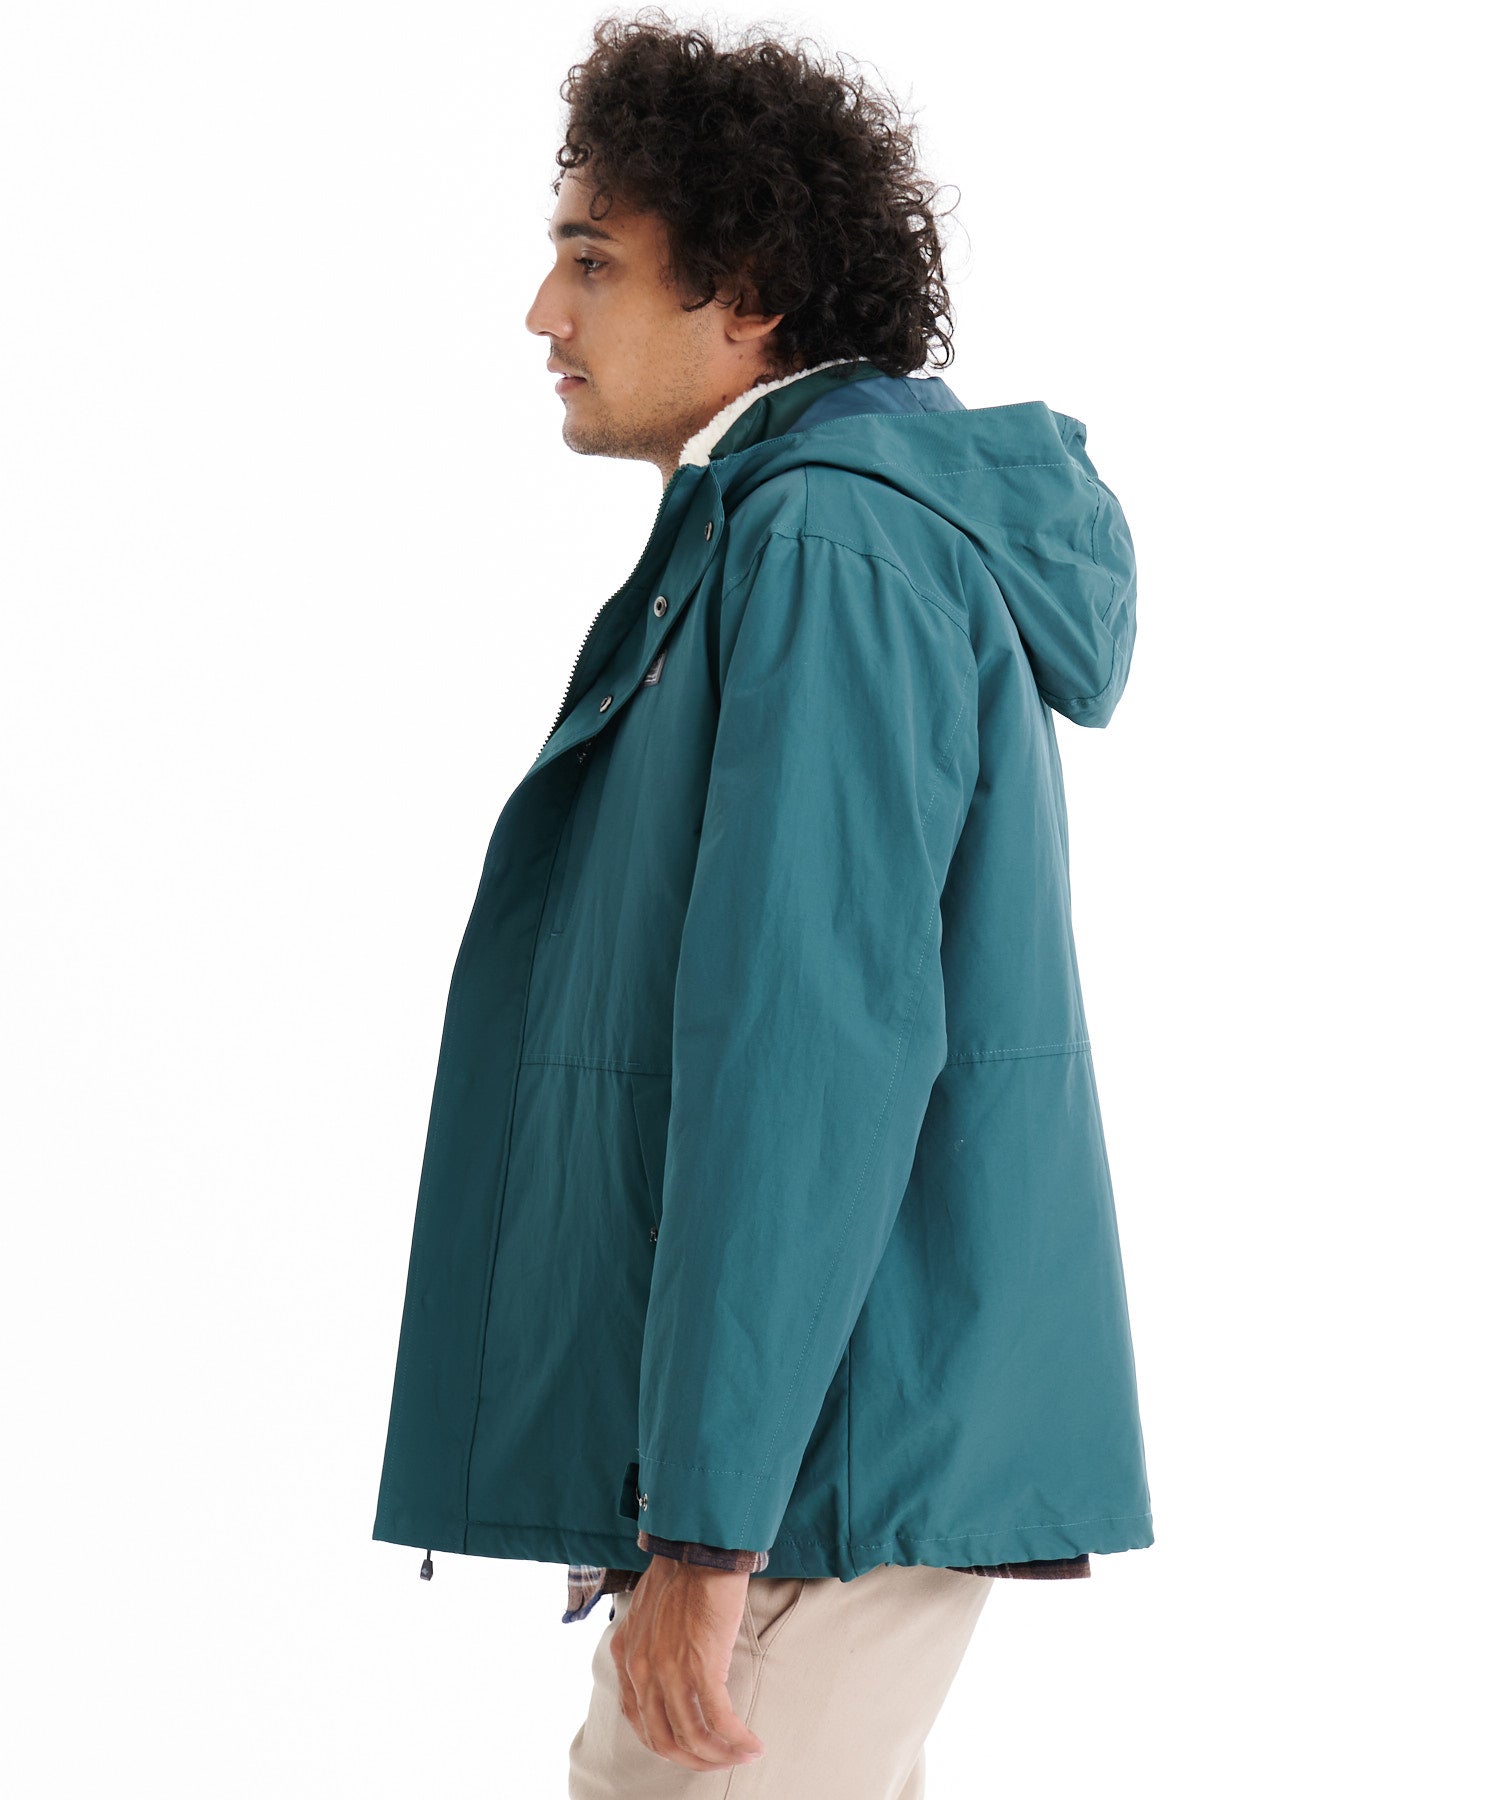 【TIME SALE】 3 IN 1 マウンテンパーカー/3 in 1 MOUNTAIN PARKA